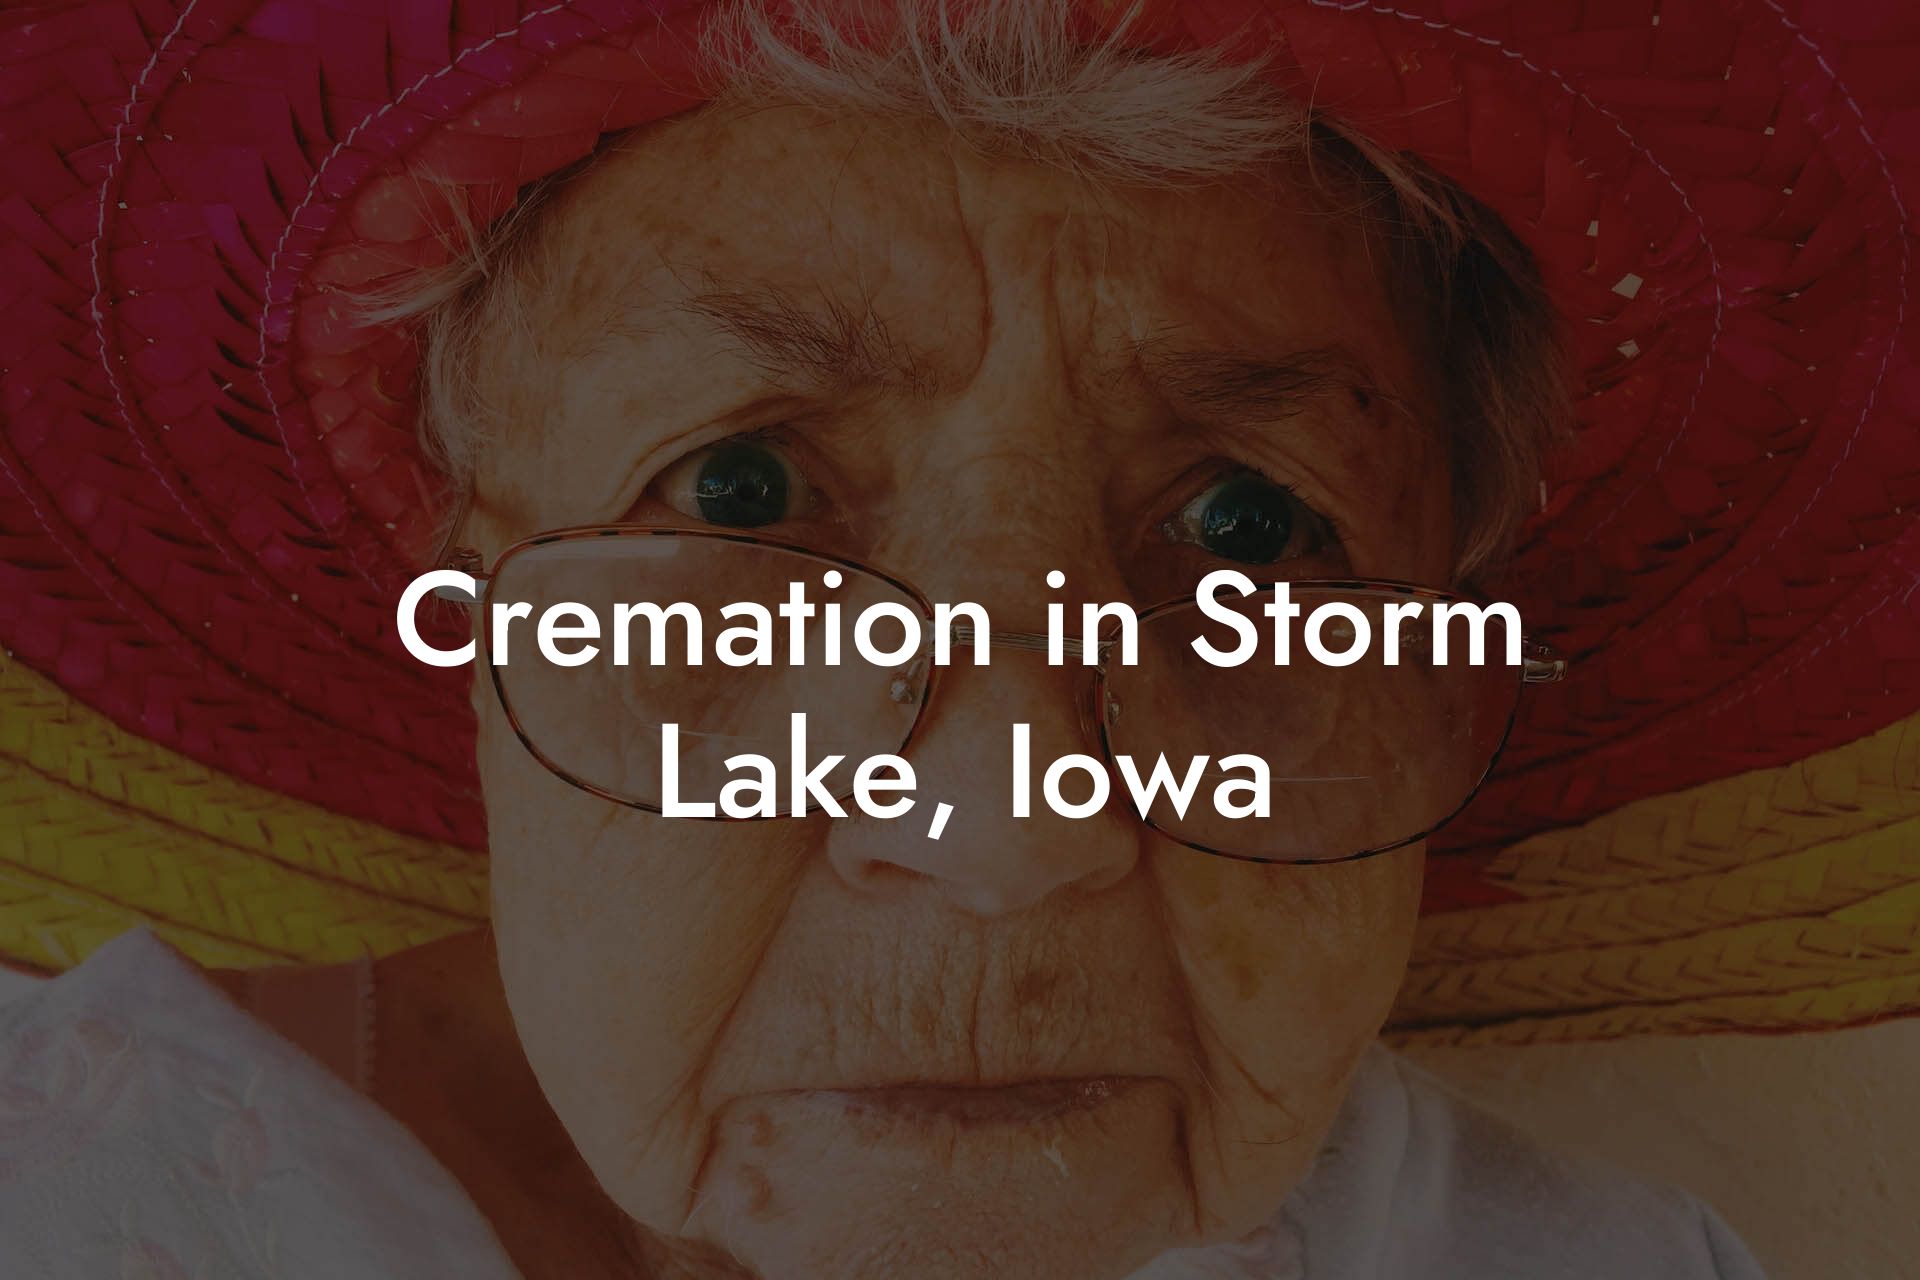 Cremation in Storm Lake, Iowa